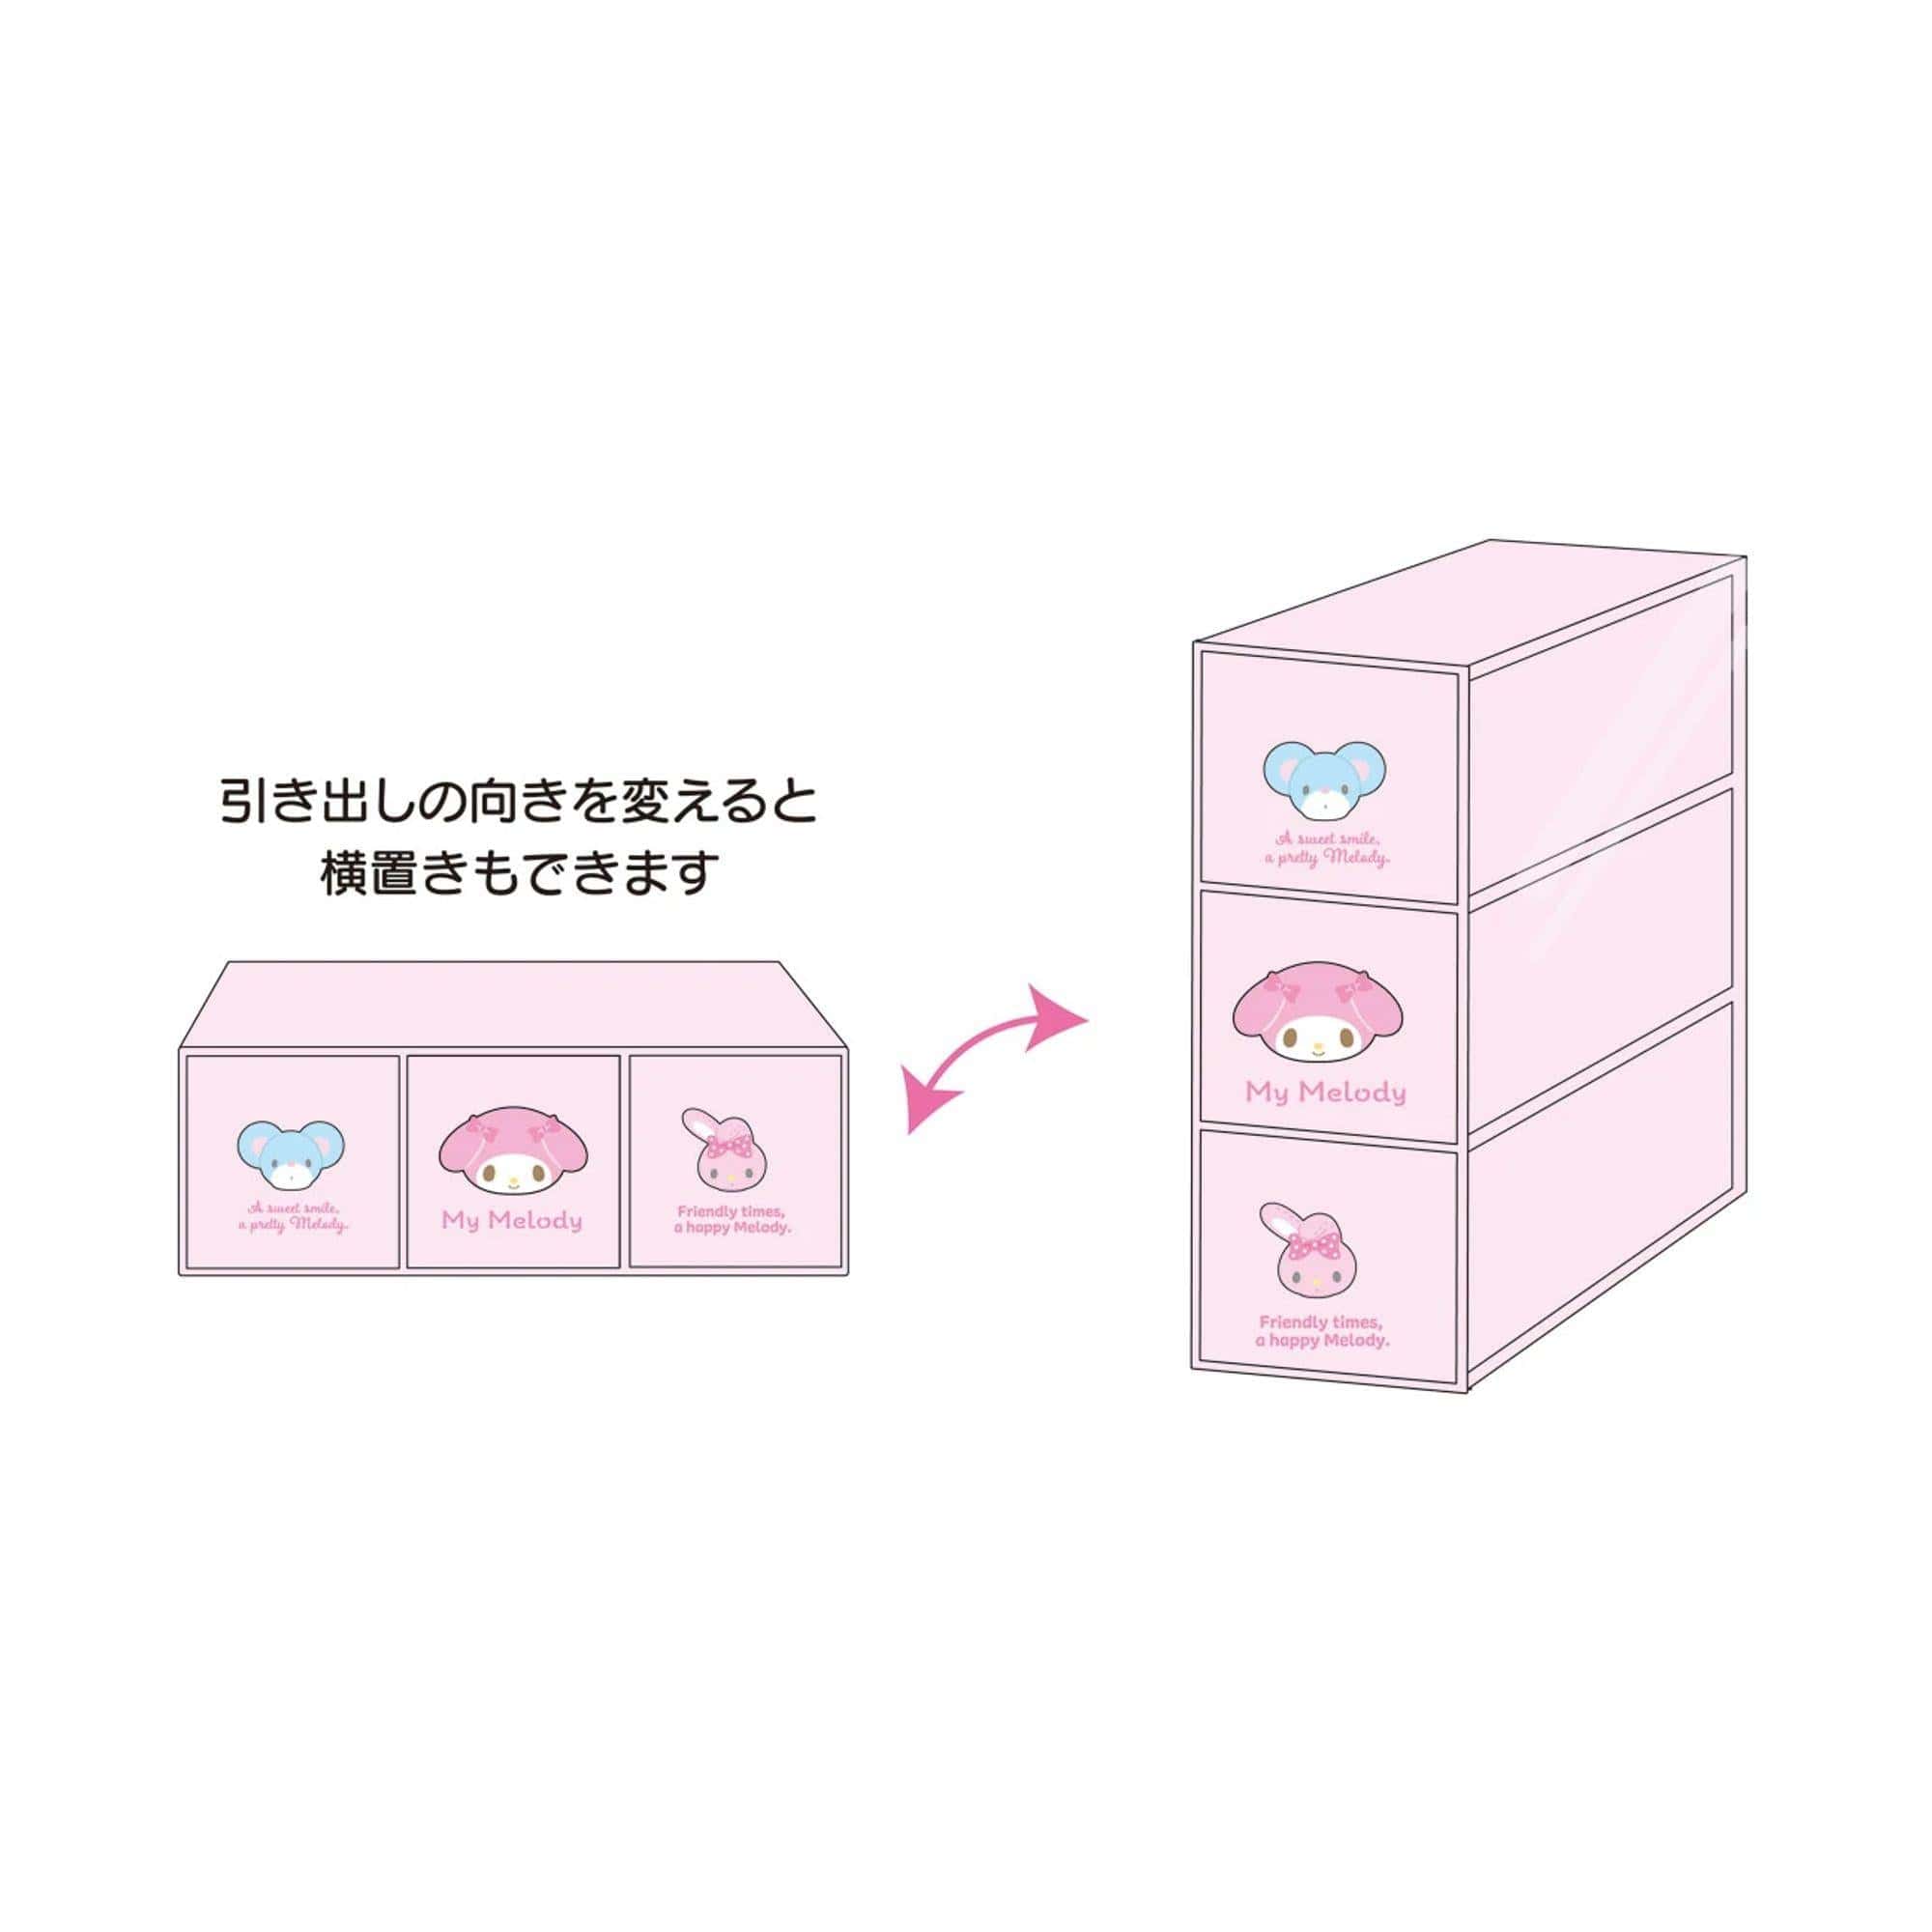 Enesco Sanrio Stackable Chest of Drawers: My Melody, Cinnamoroll, Kuromi My Melody Kawaii Gifts